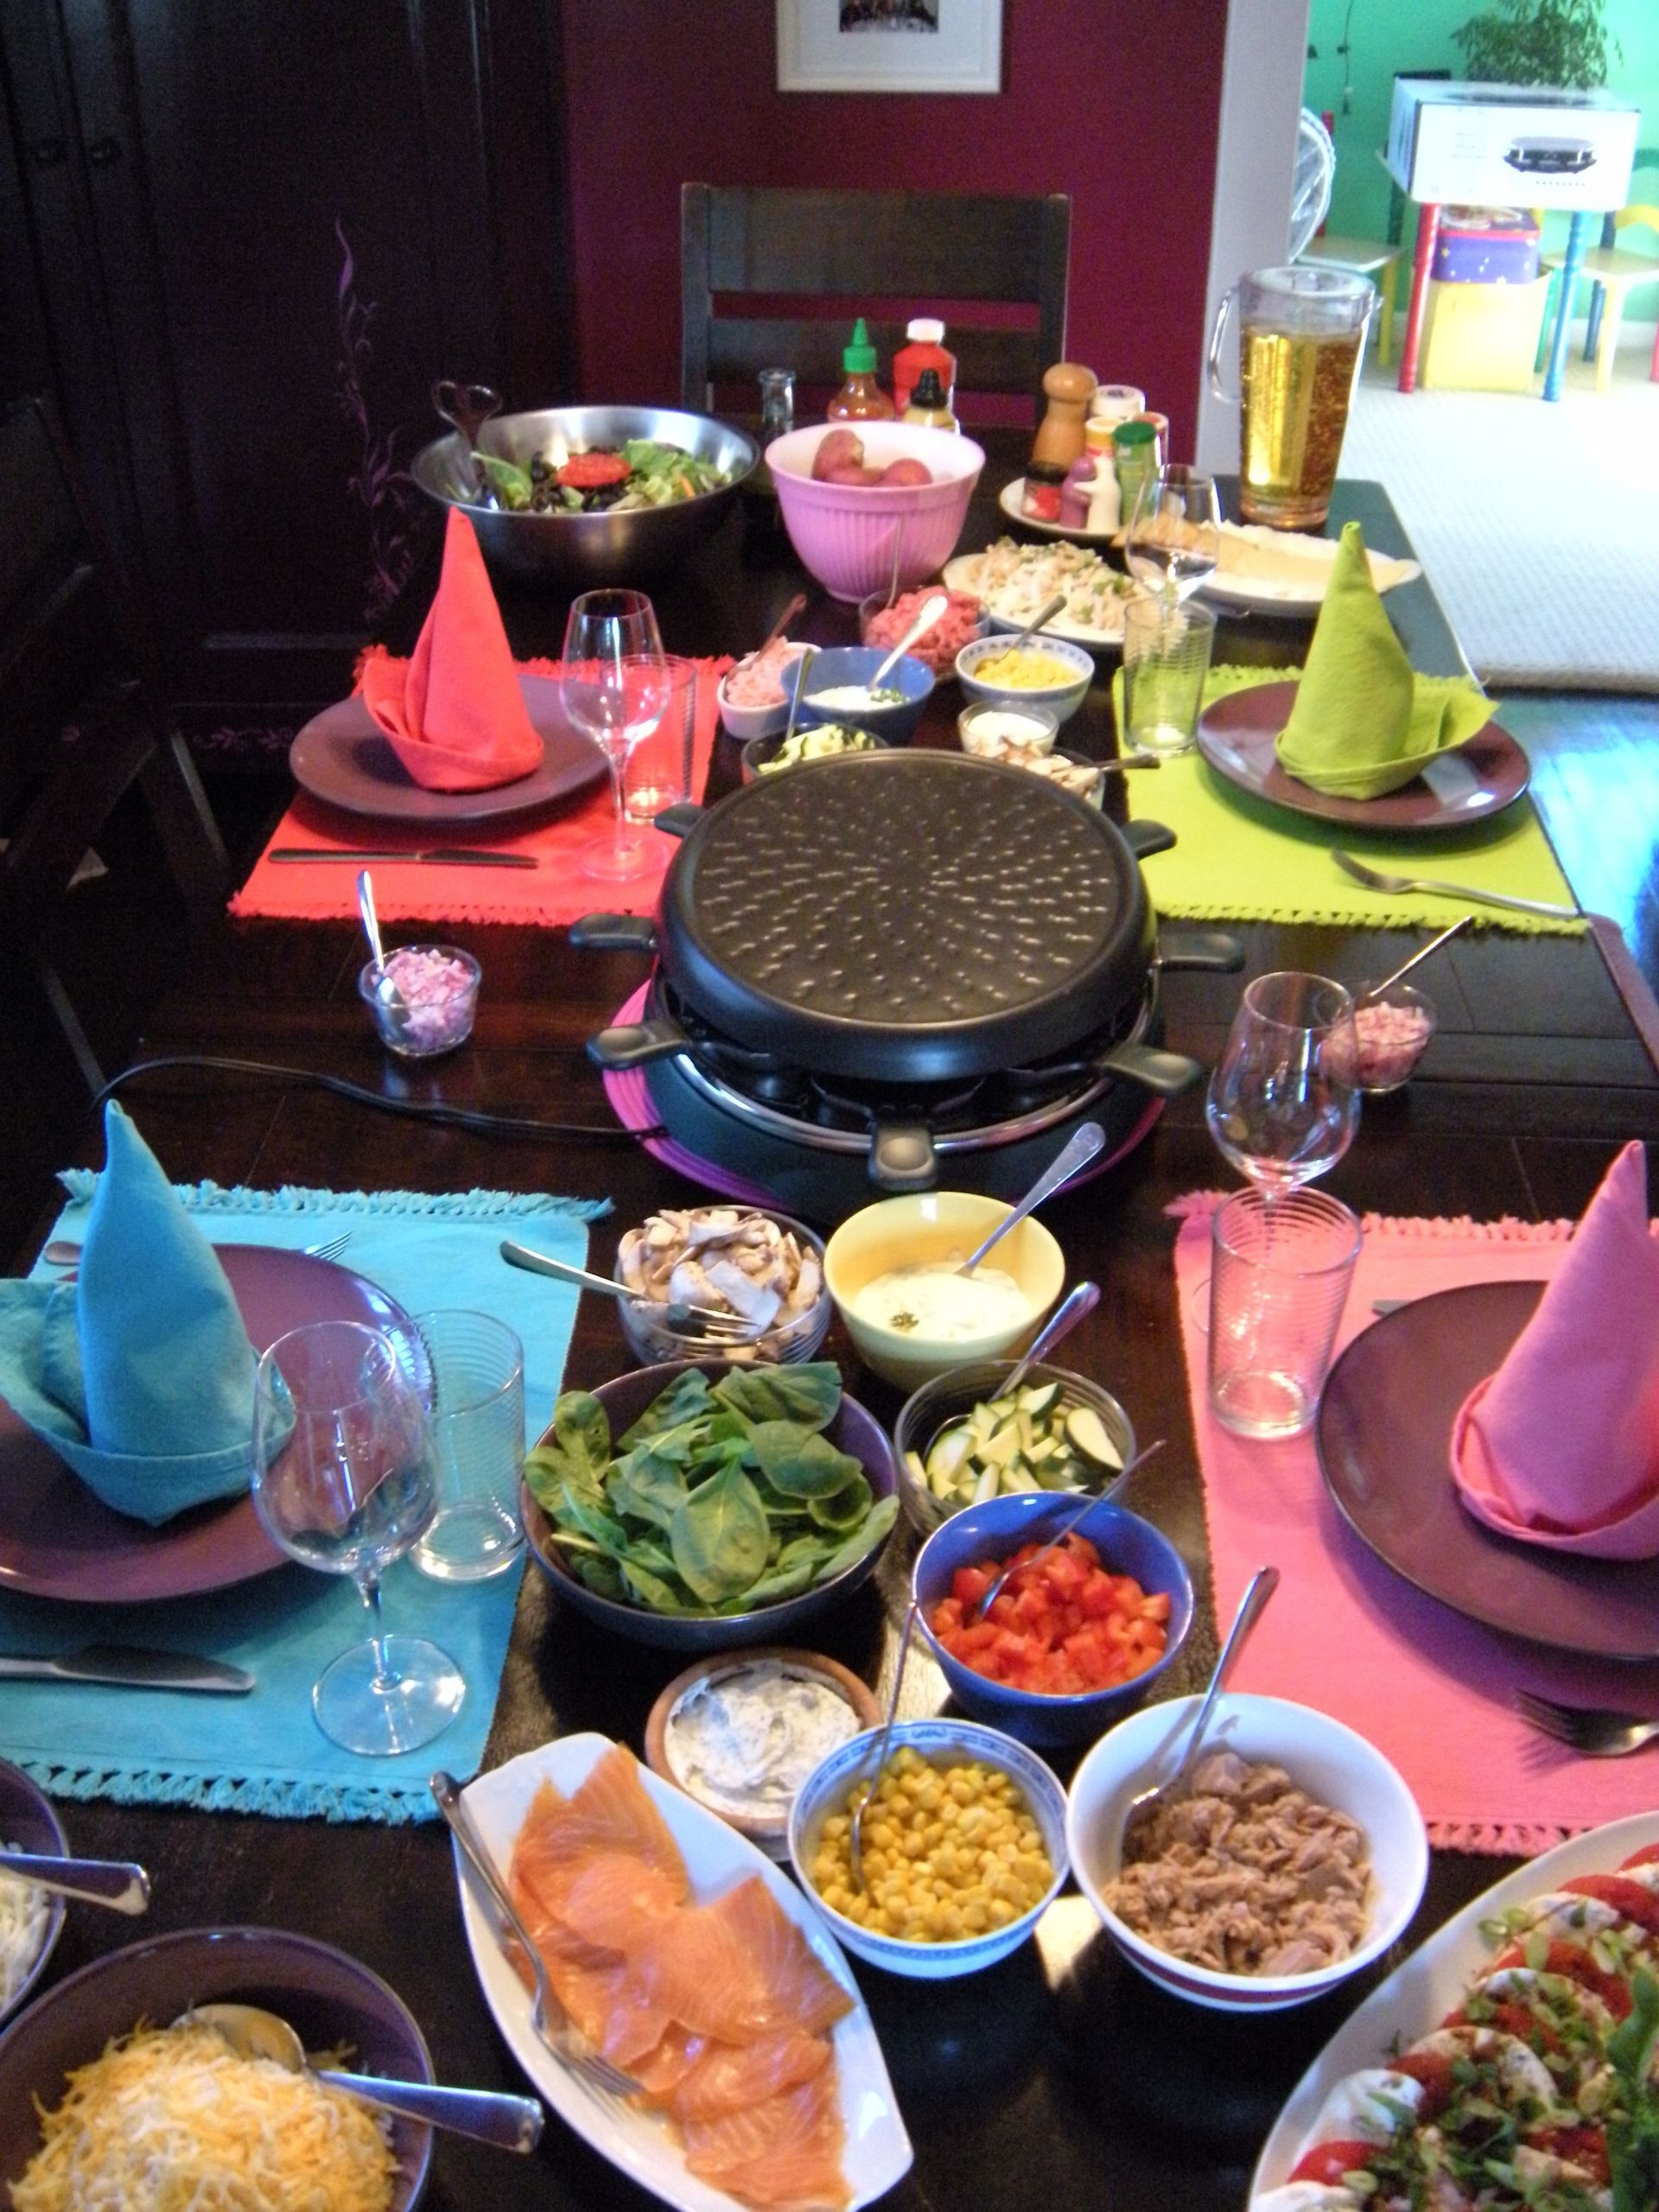 Raclette Dinner Party Ideas
 6 Best Ingre nts for a Raclette Grill